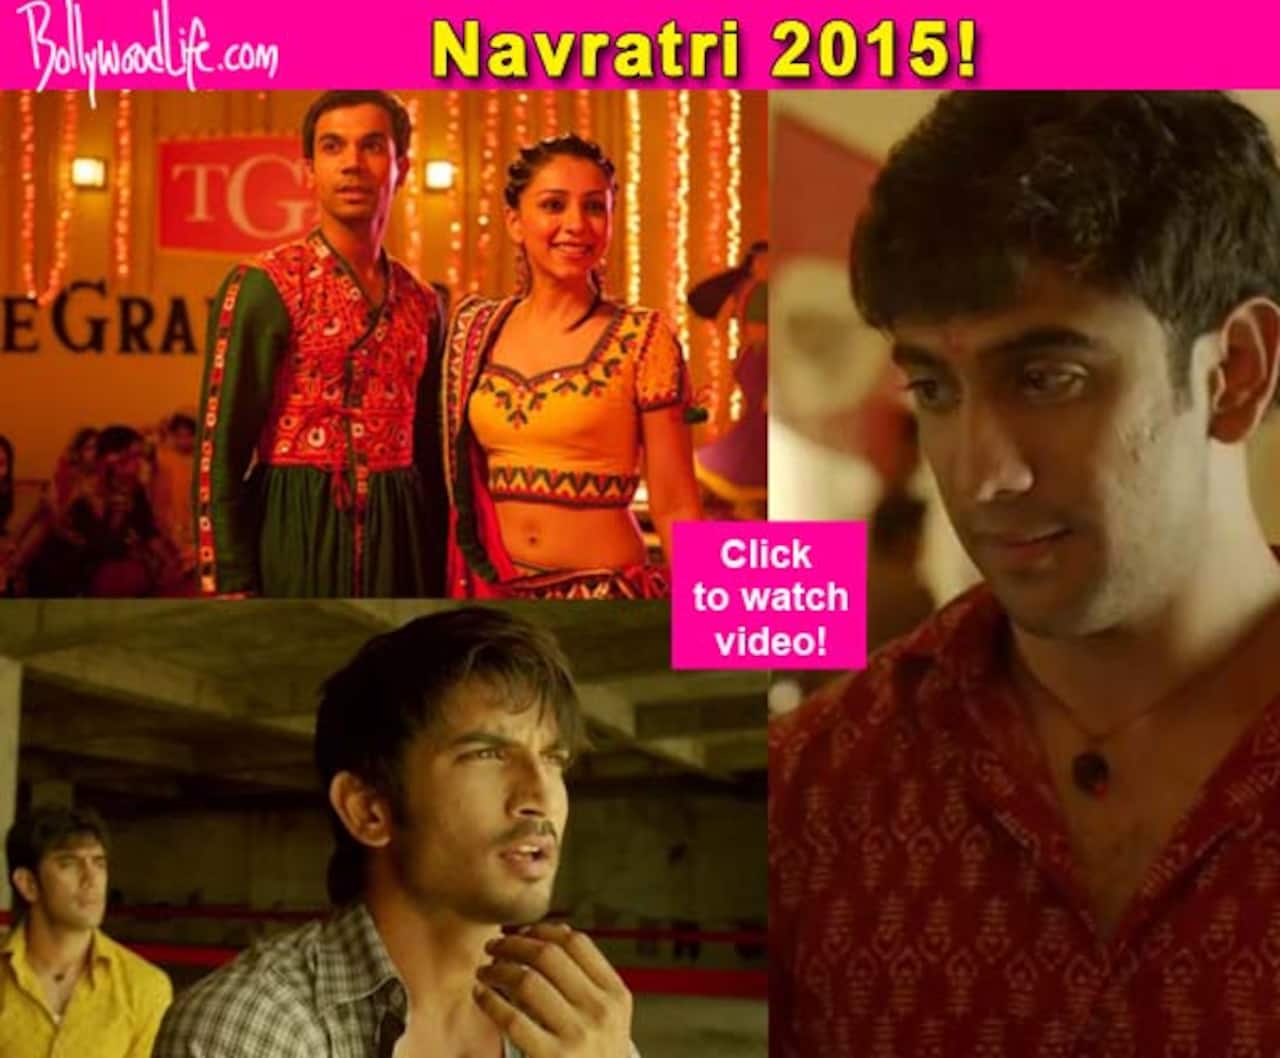 Navratri 2015 Song of the day: Welcome the festivities with Hey Shubaarambh from Kai Po Che - watch video!